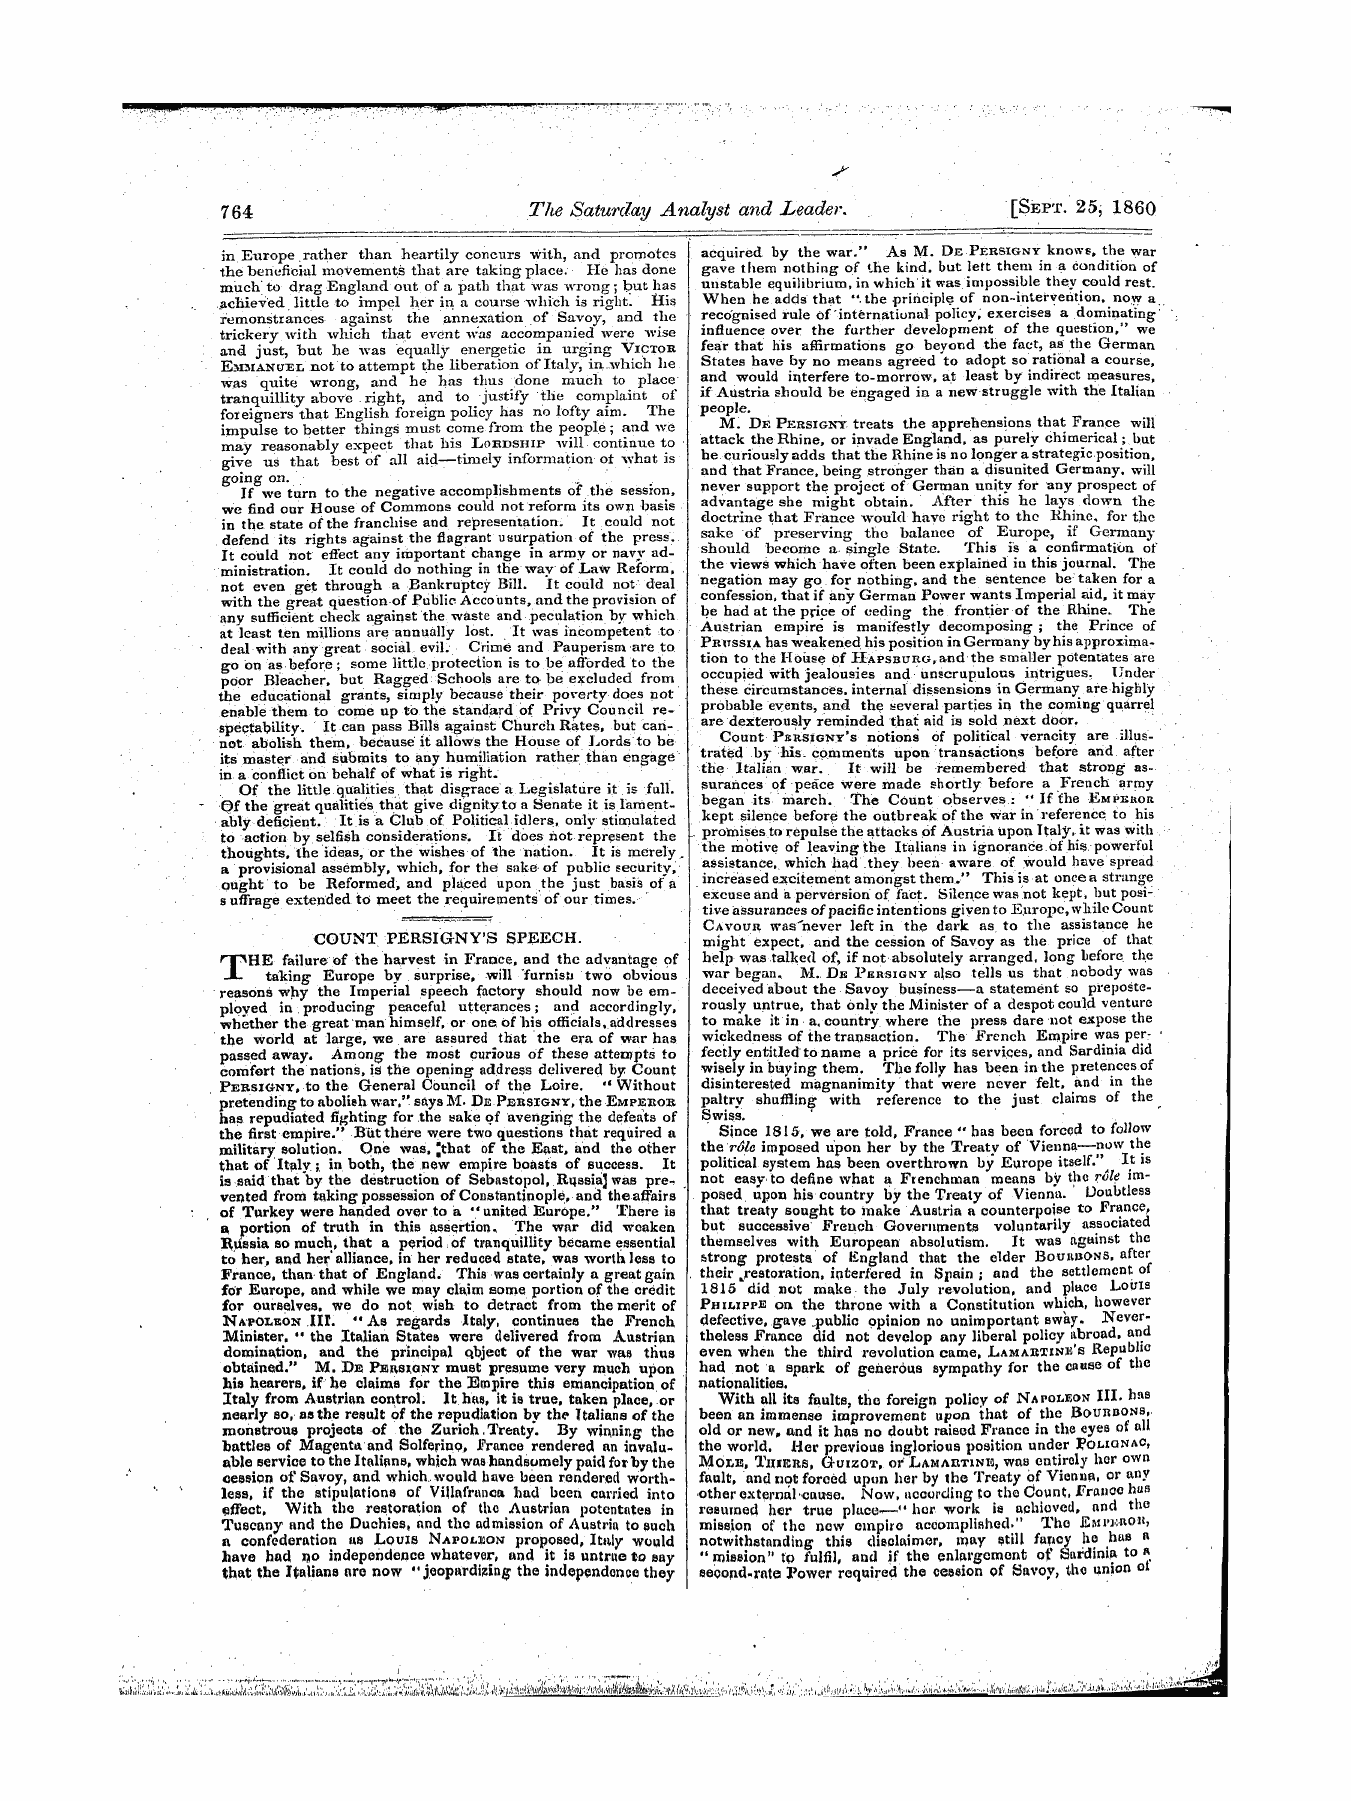 Leader (1850-1860): jS F Y, 1st edition - Count Persigtny's Speech.